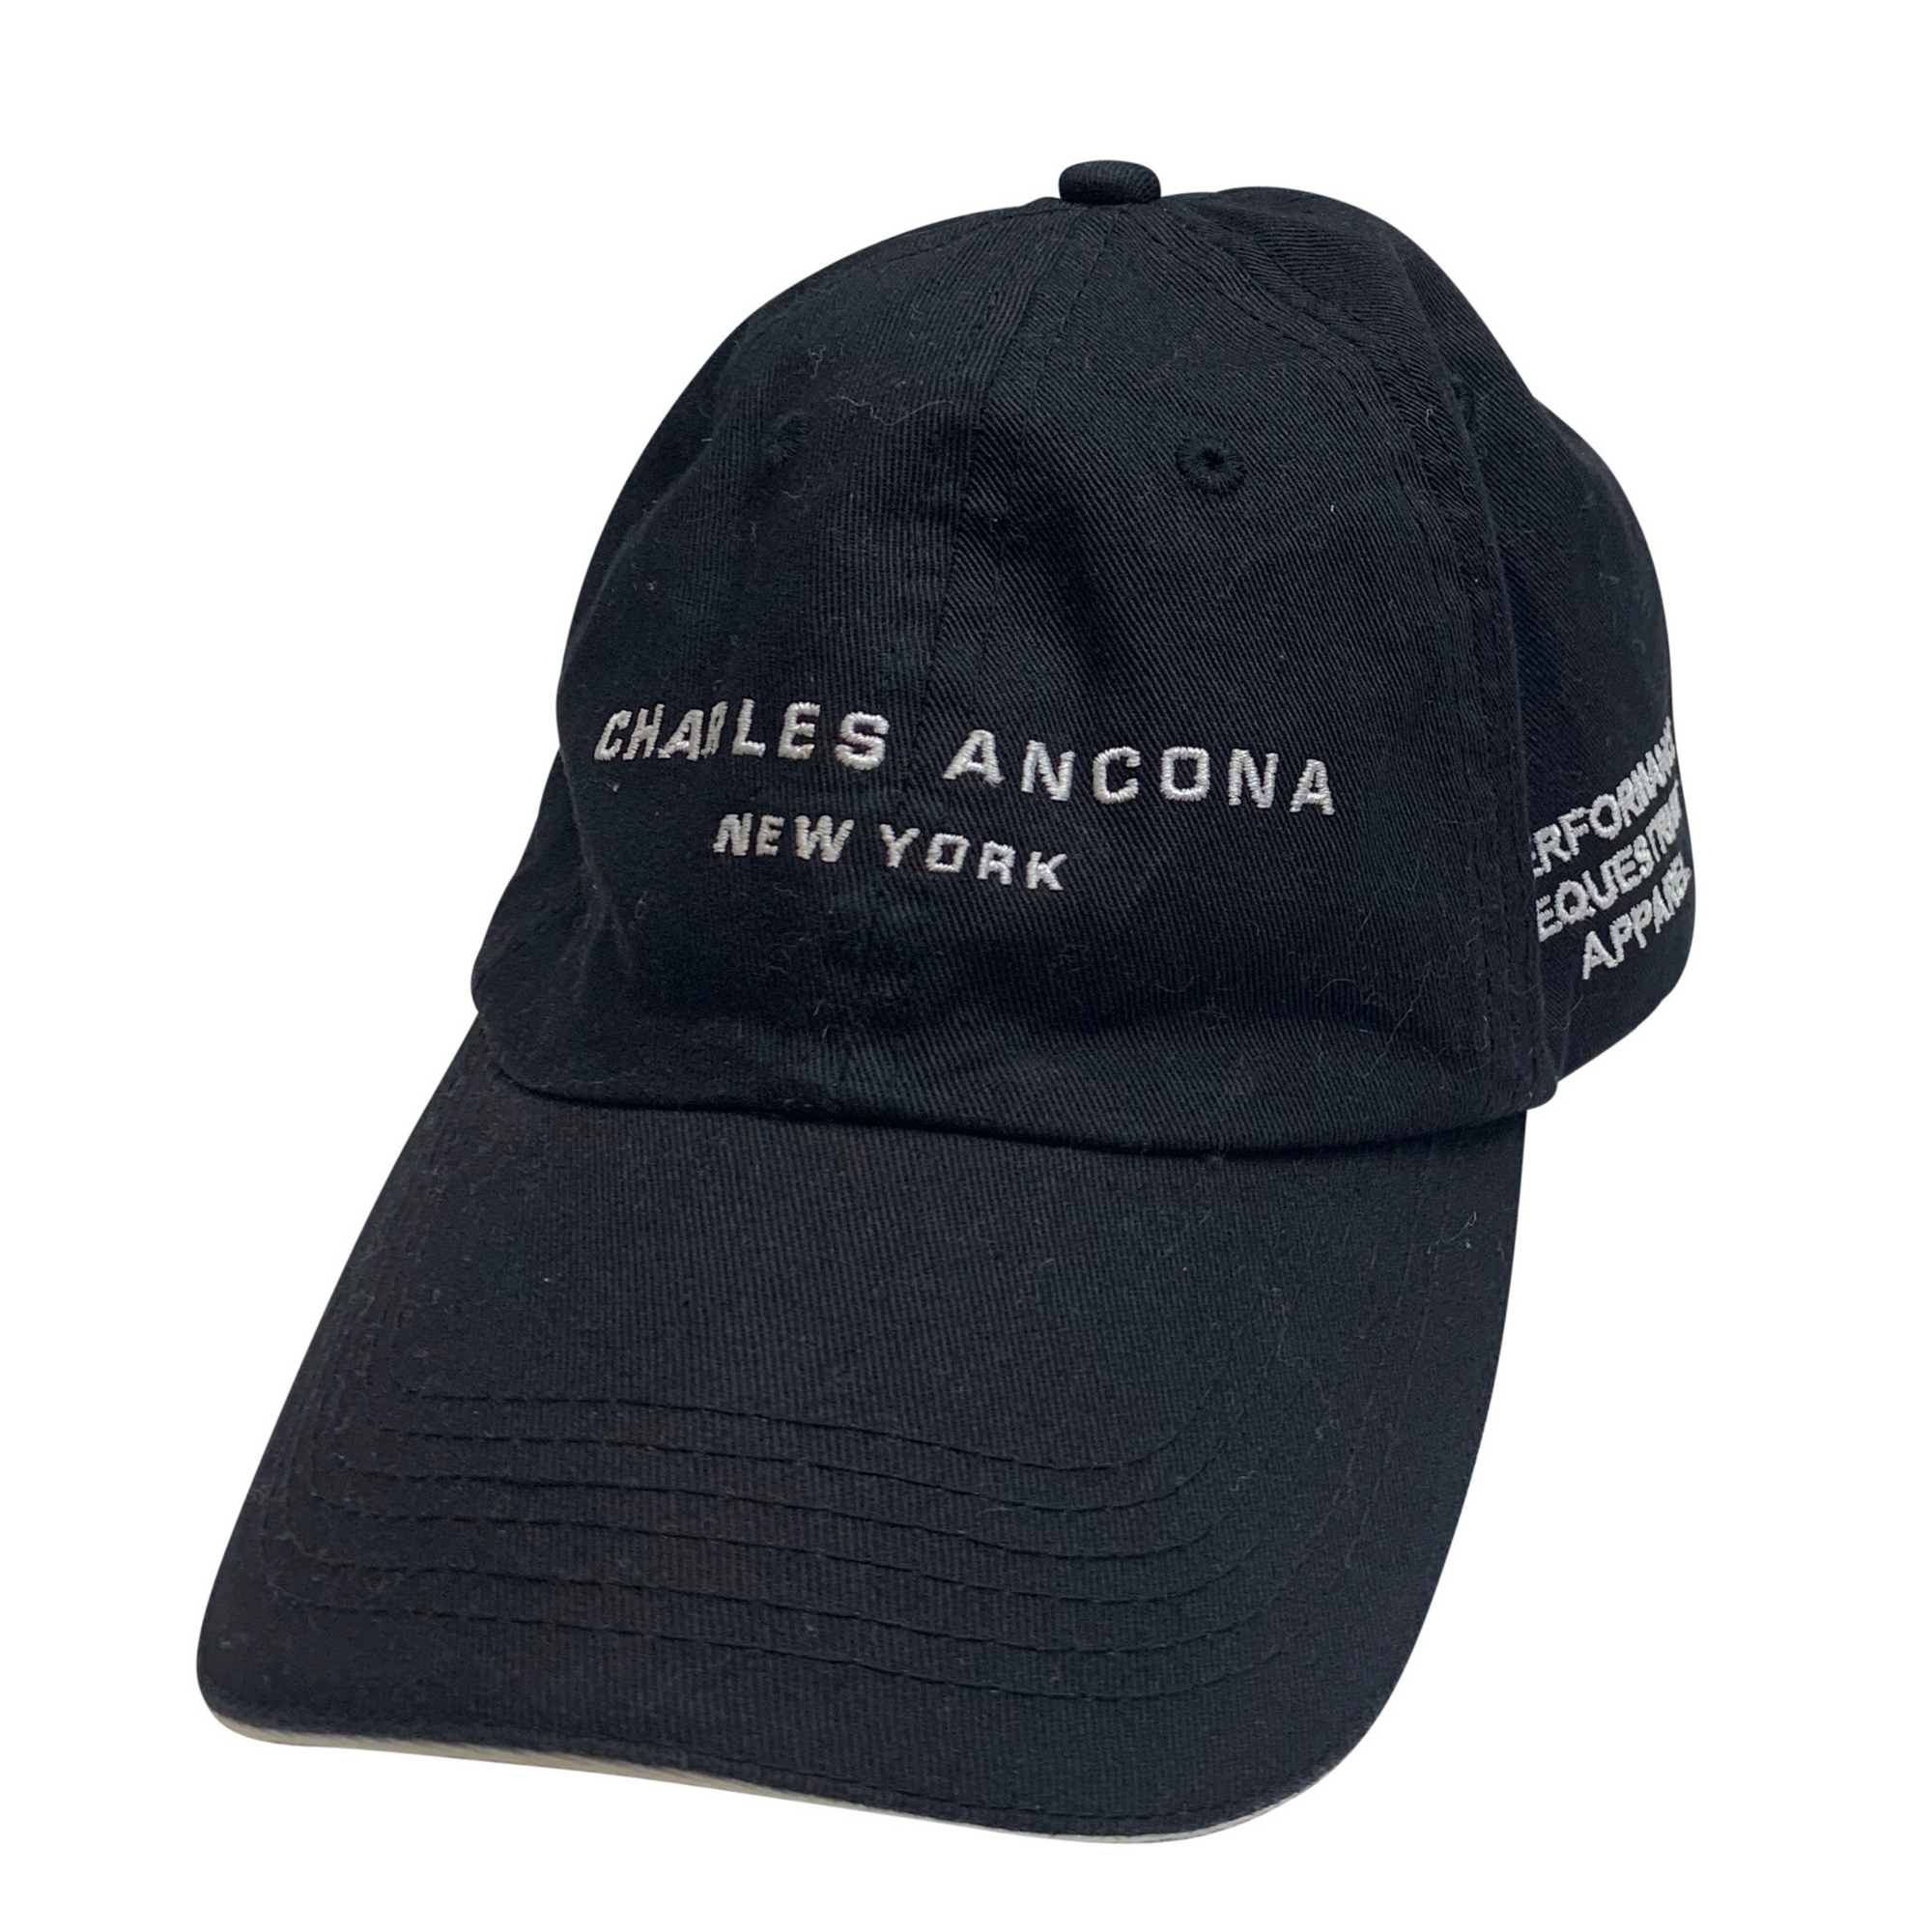 Charles Ancona Classic Hat in Black - One Size